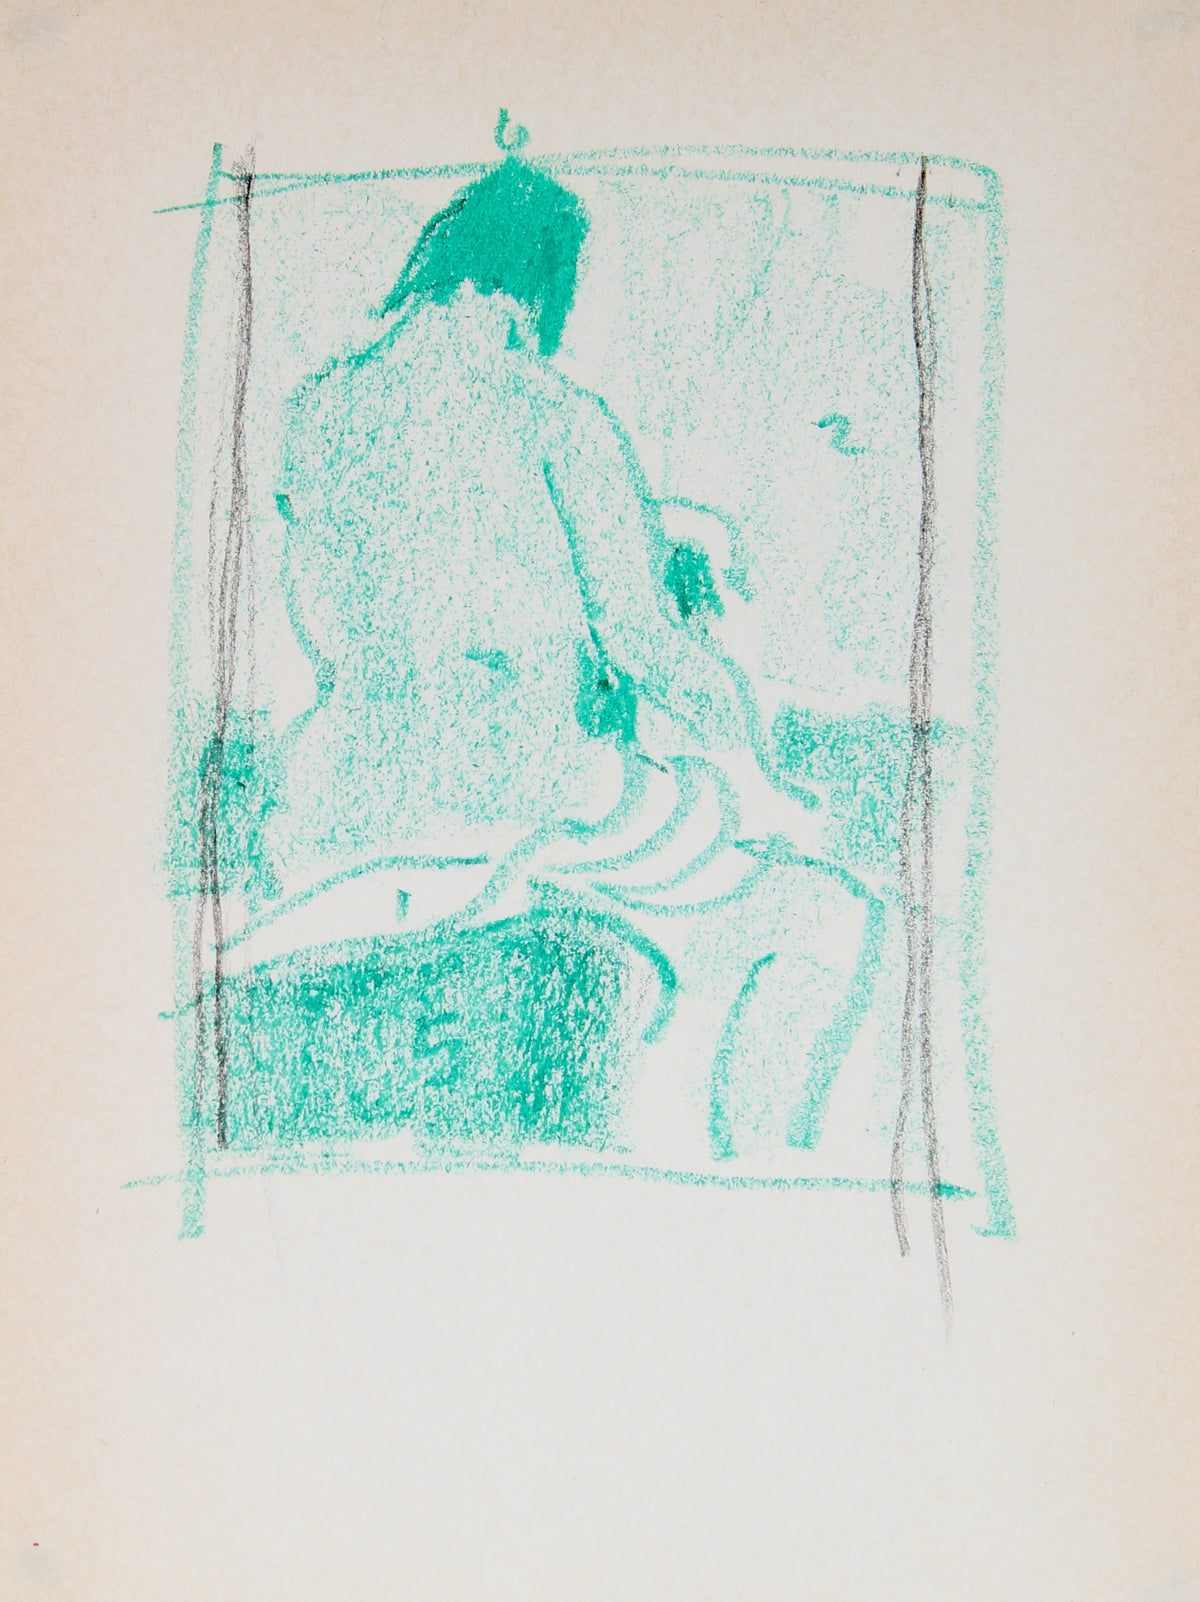 Green Monochromatic Nude From Behind &lt;br&gt;1989 Gouache &amp; Graphite&lt;br&gt;&lt;br&gt;#29727